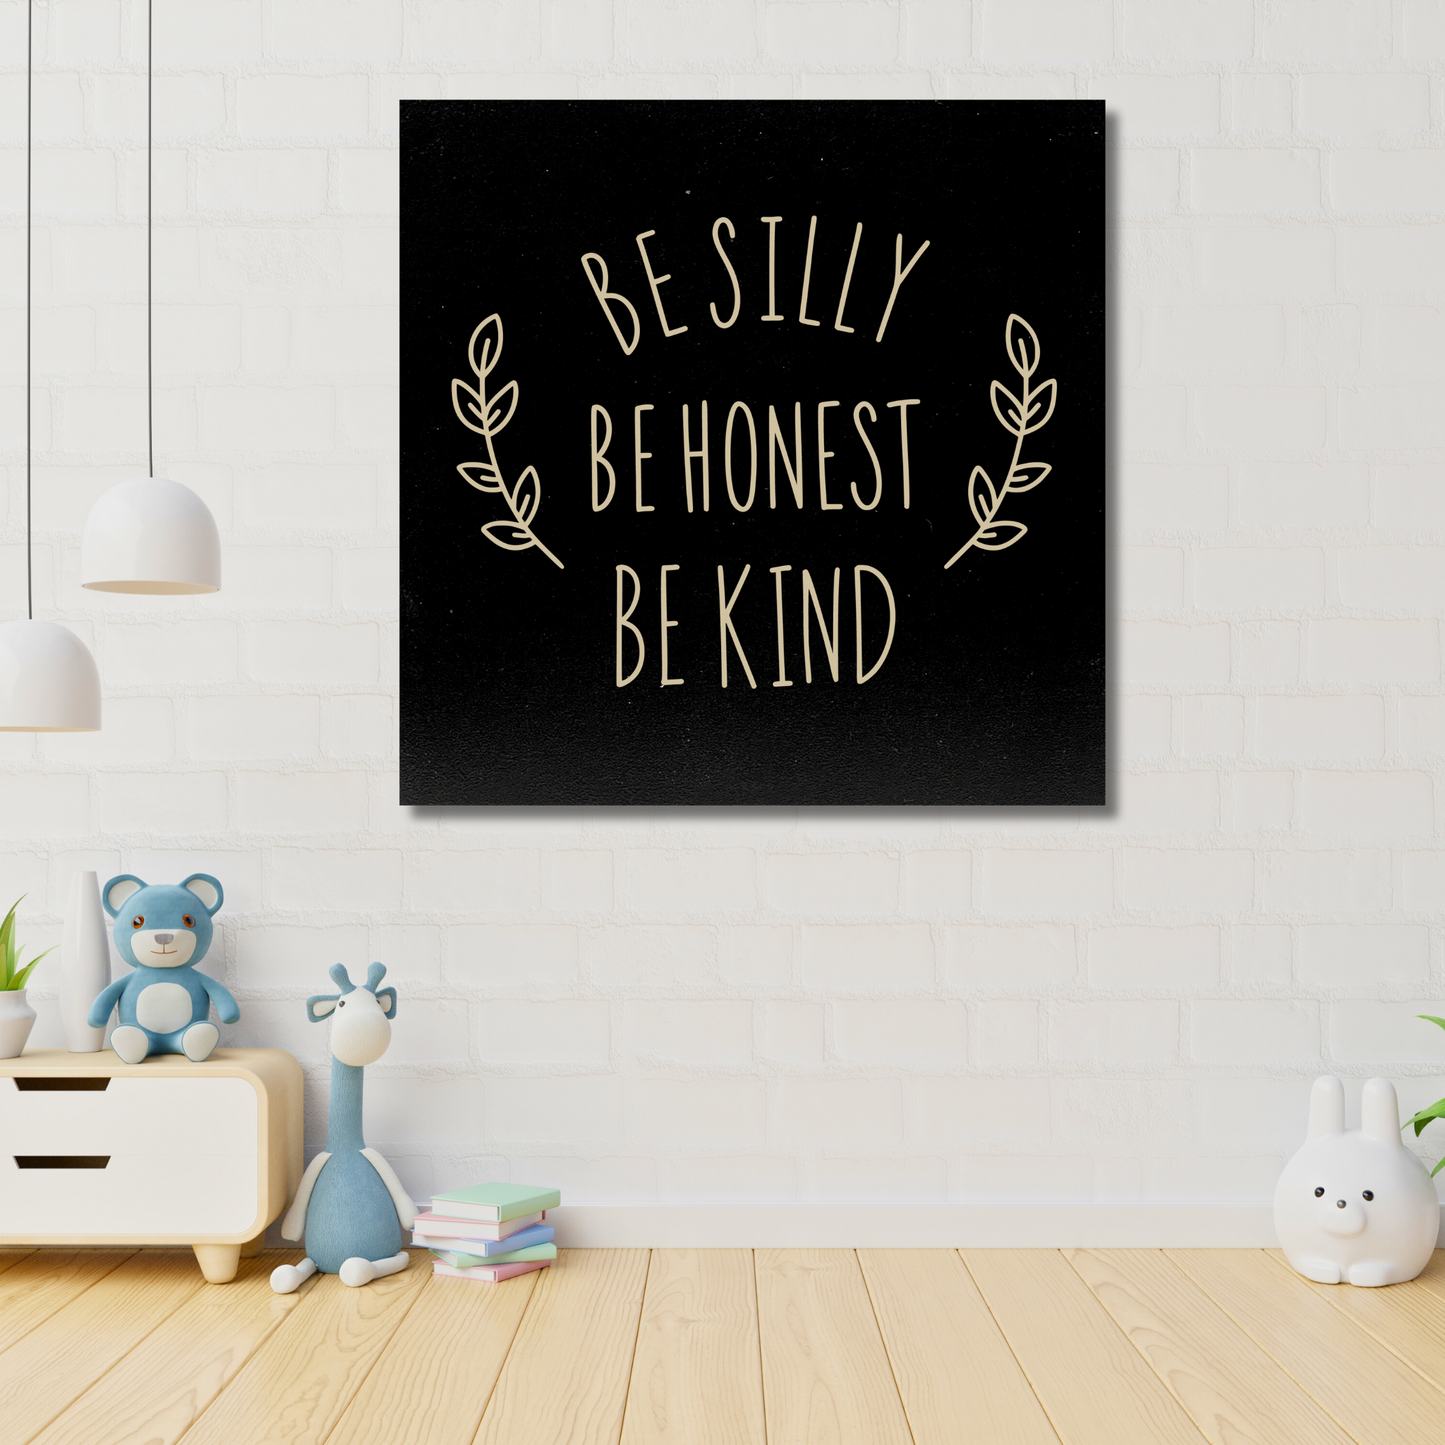 Be Silly Be Honest Be Kind Inspirational Quote